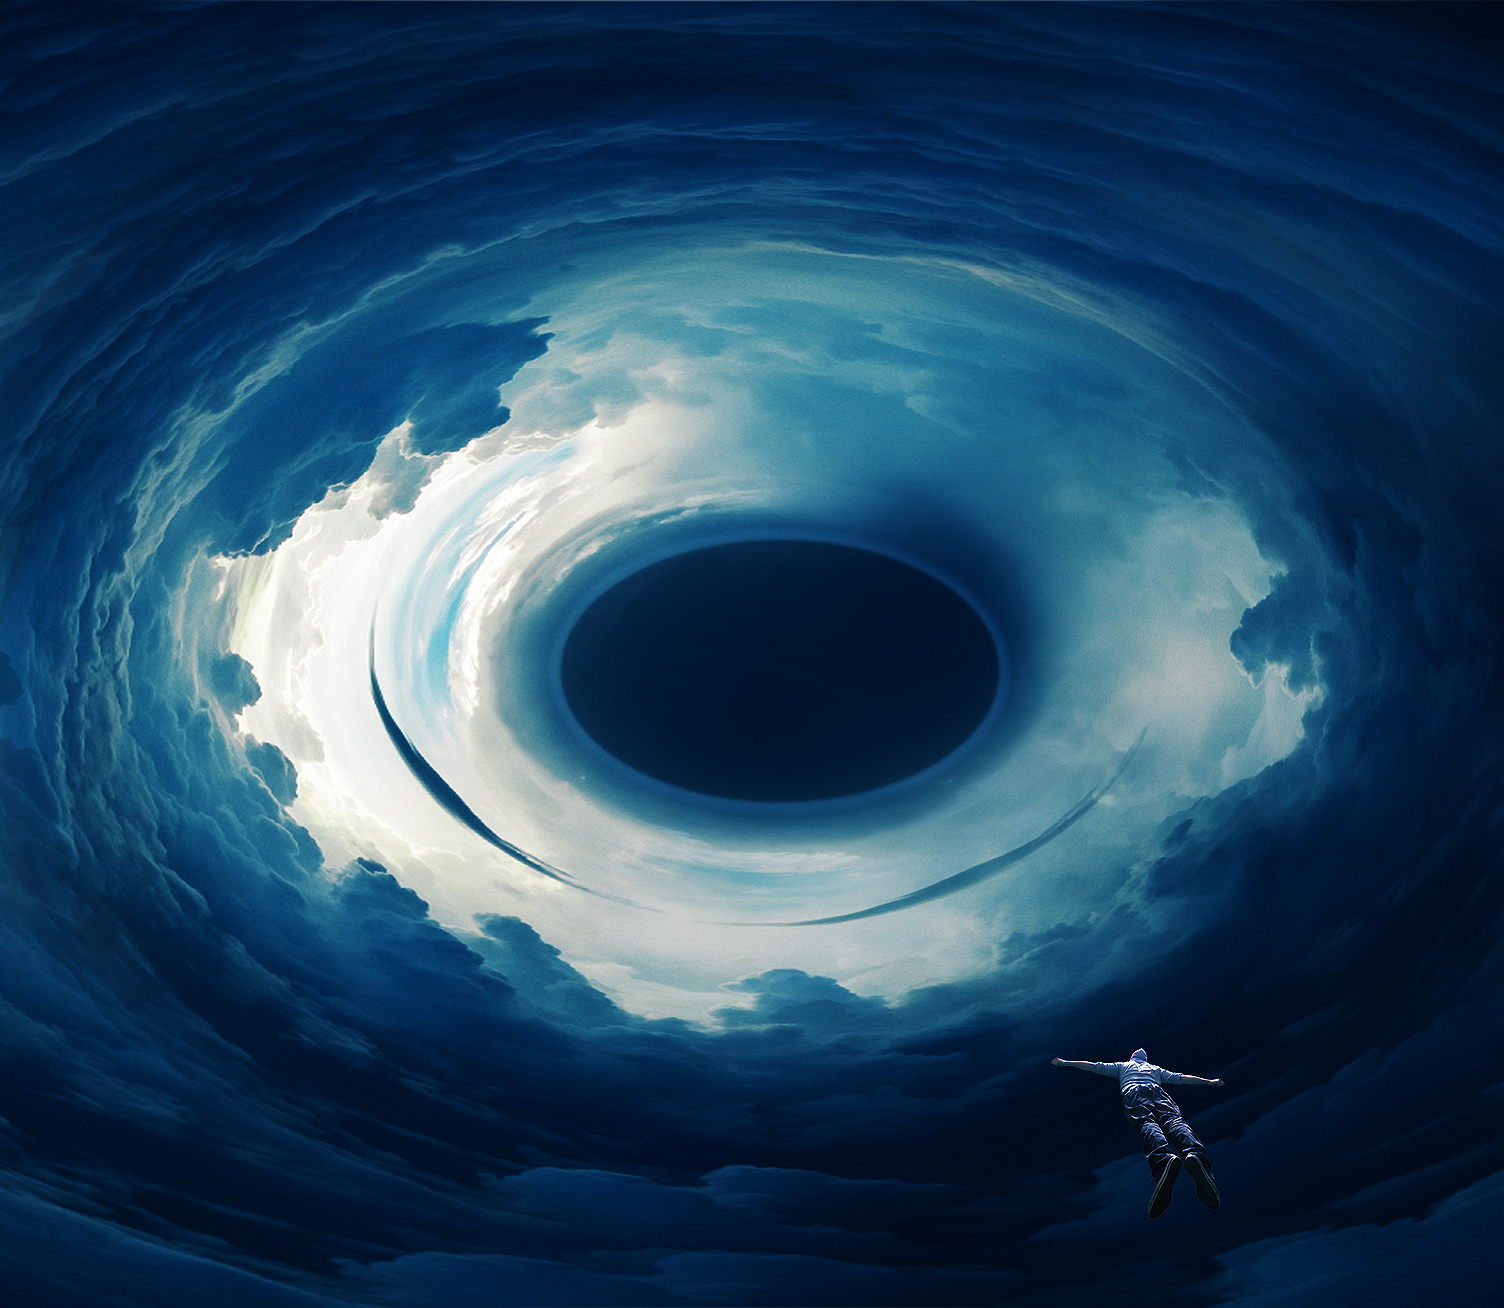 Storm hole by chrisi-cry25 on DeviantArt